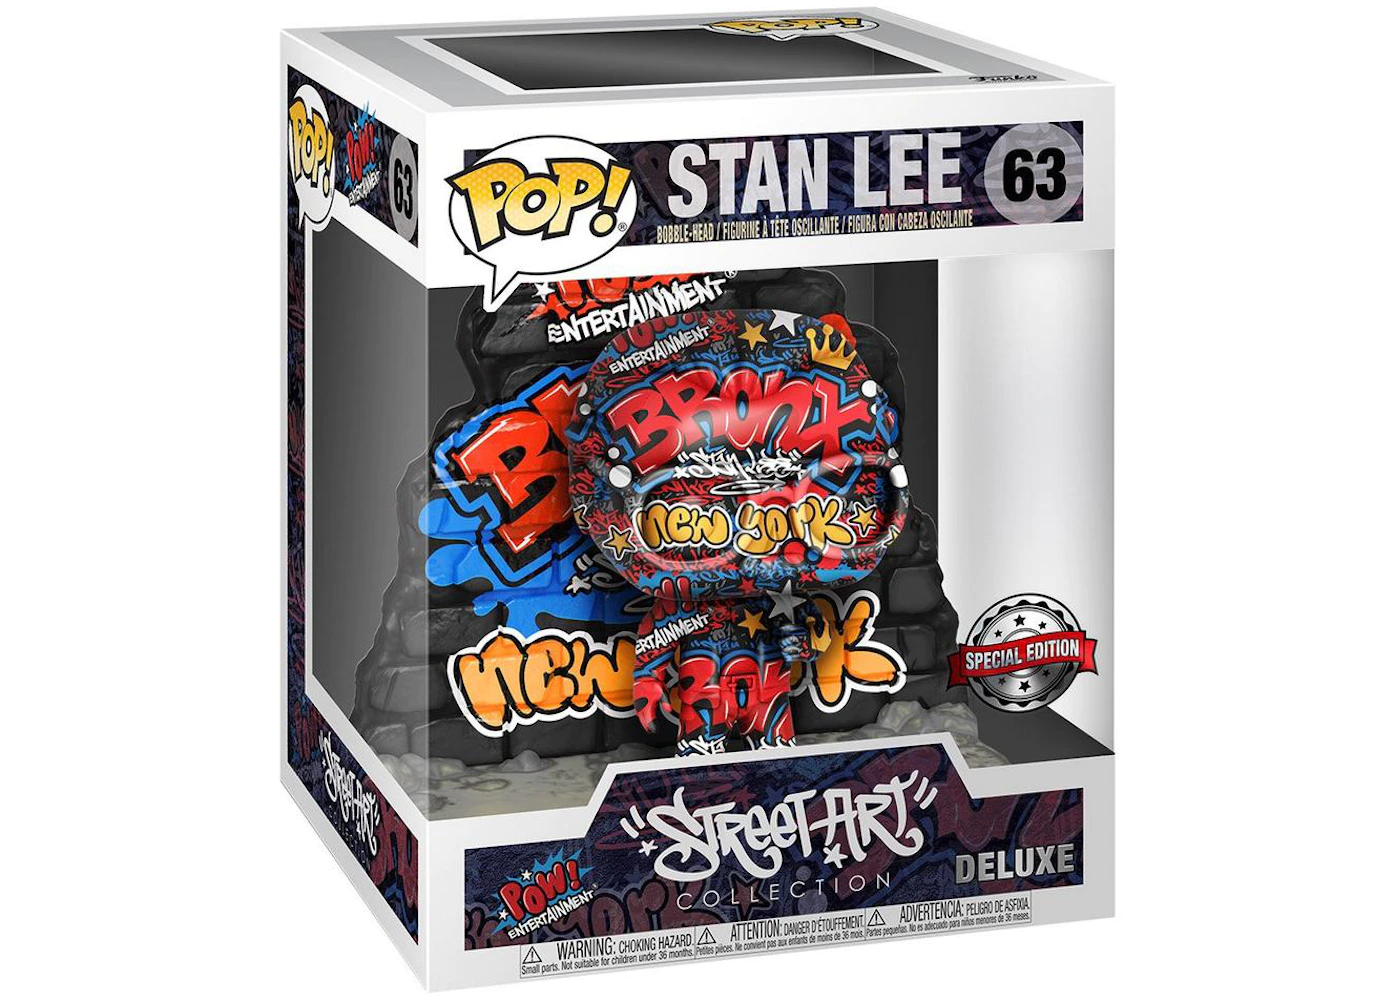 Funko Pop! Stan Lee Street Art Collection Deluxe Special Edition Figure #63  - US